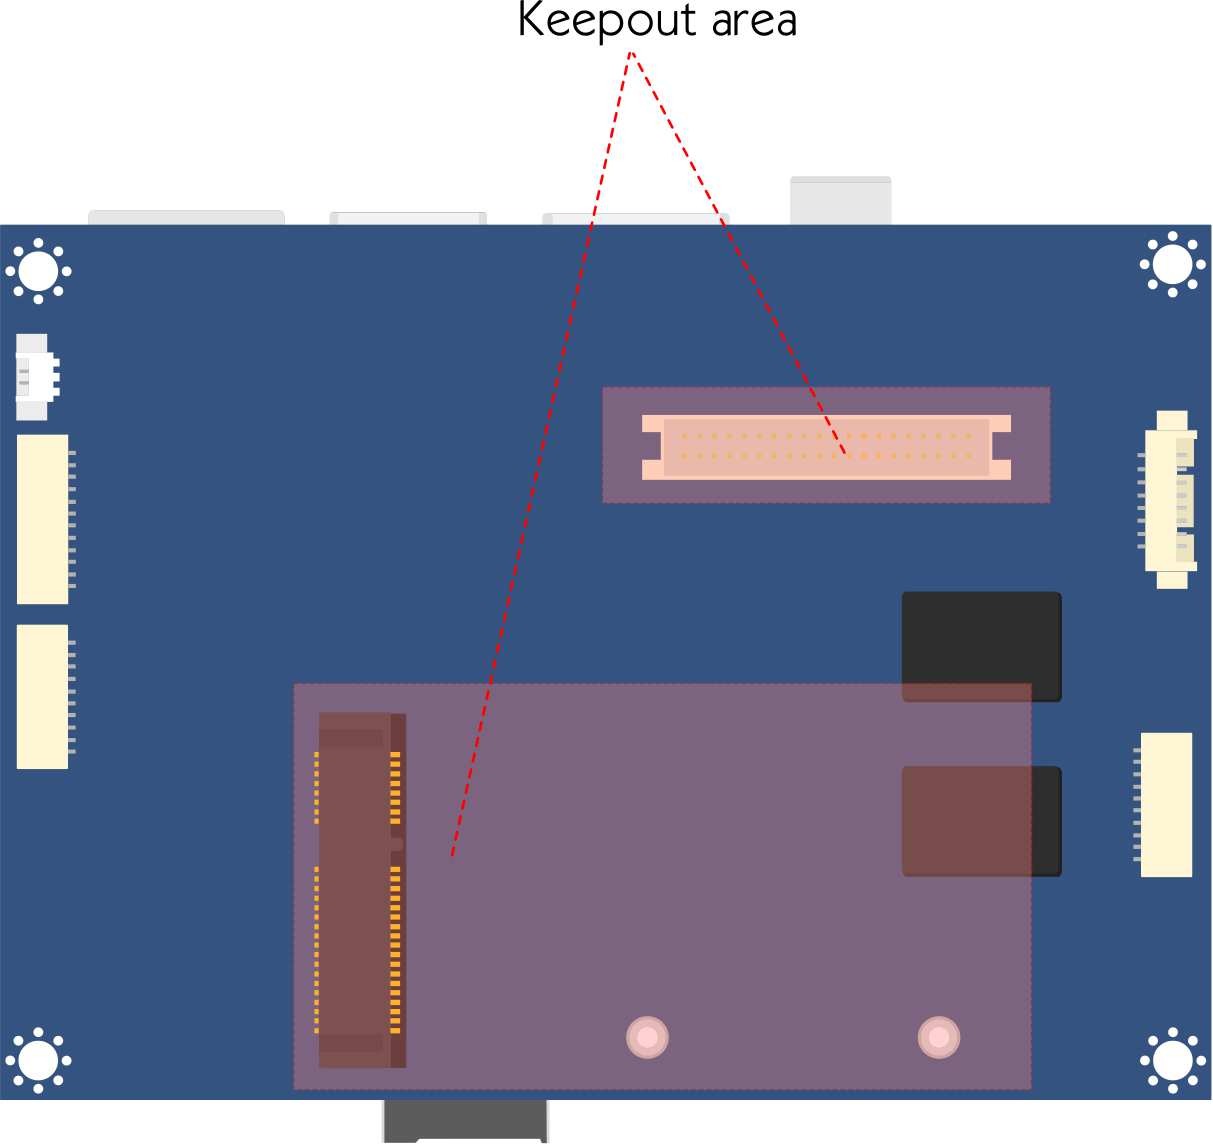 Suggested keepout areas, bottom